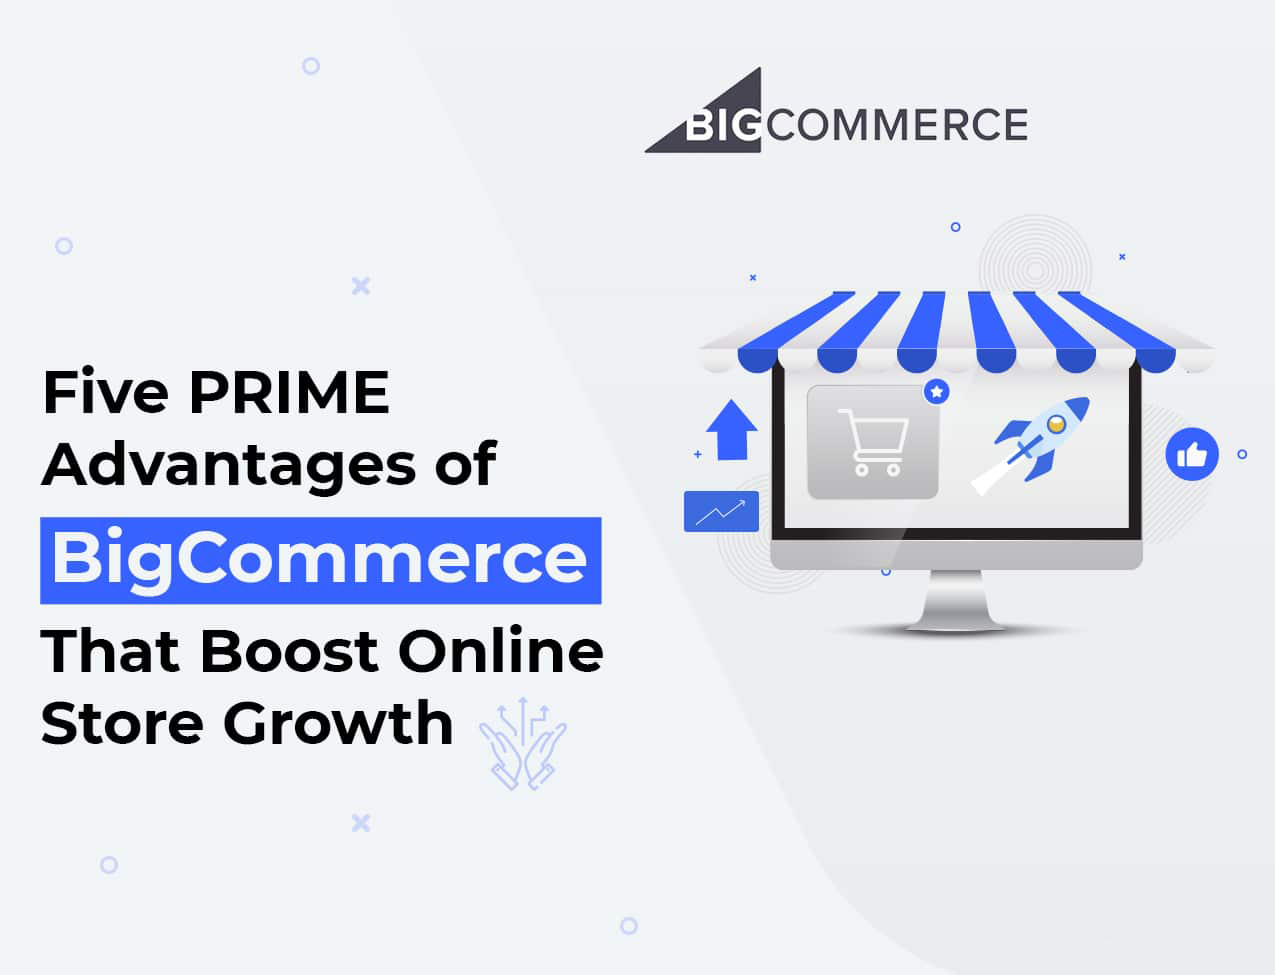 Five PRIME Advantages of BigCommerce That Boost Online Store Growth